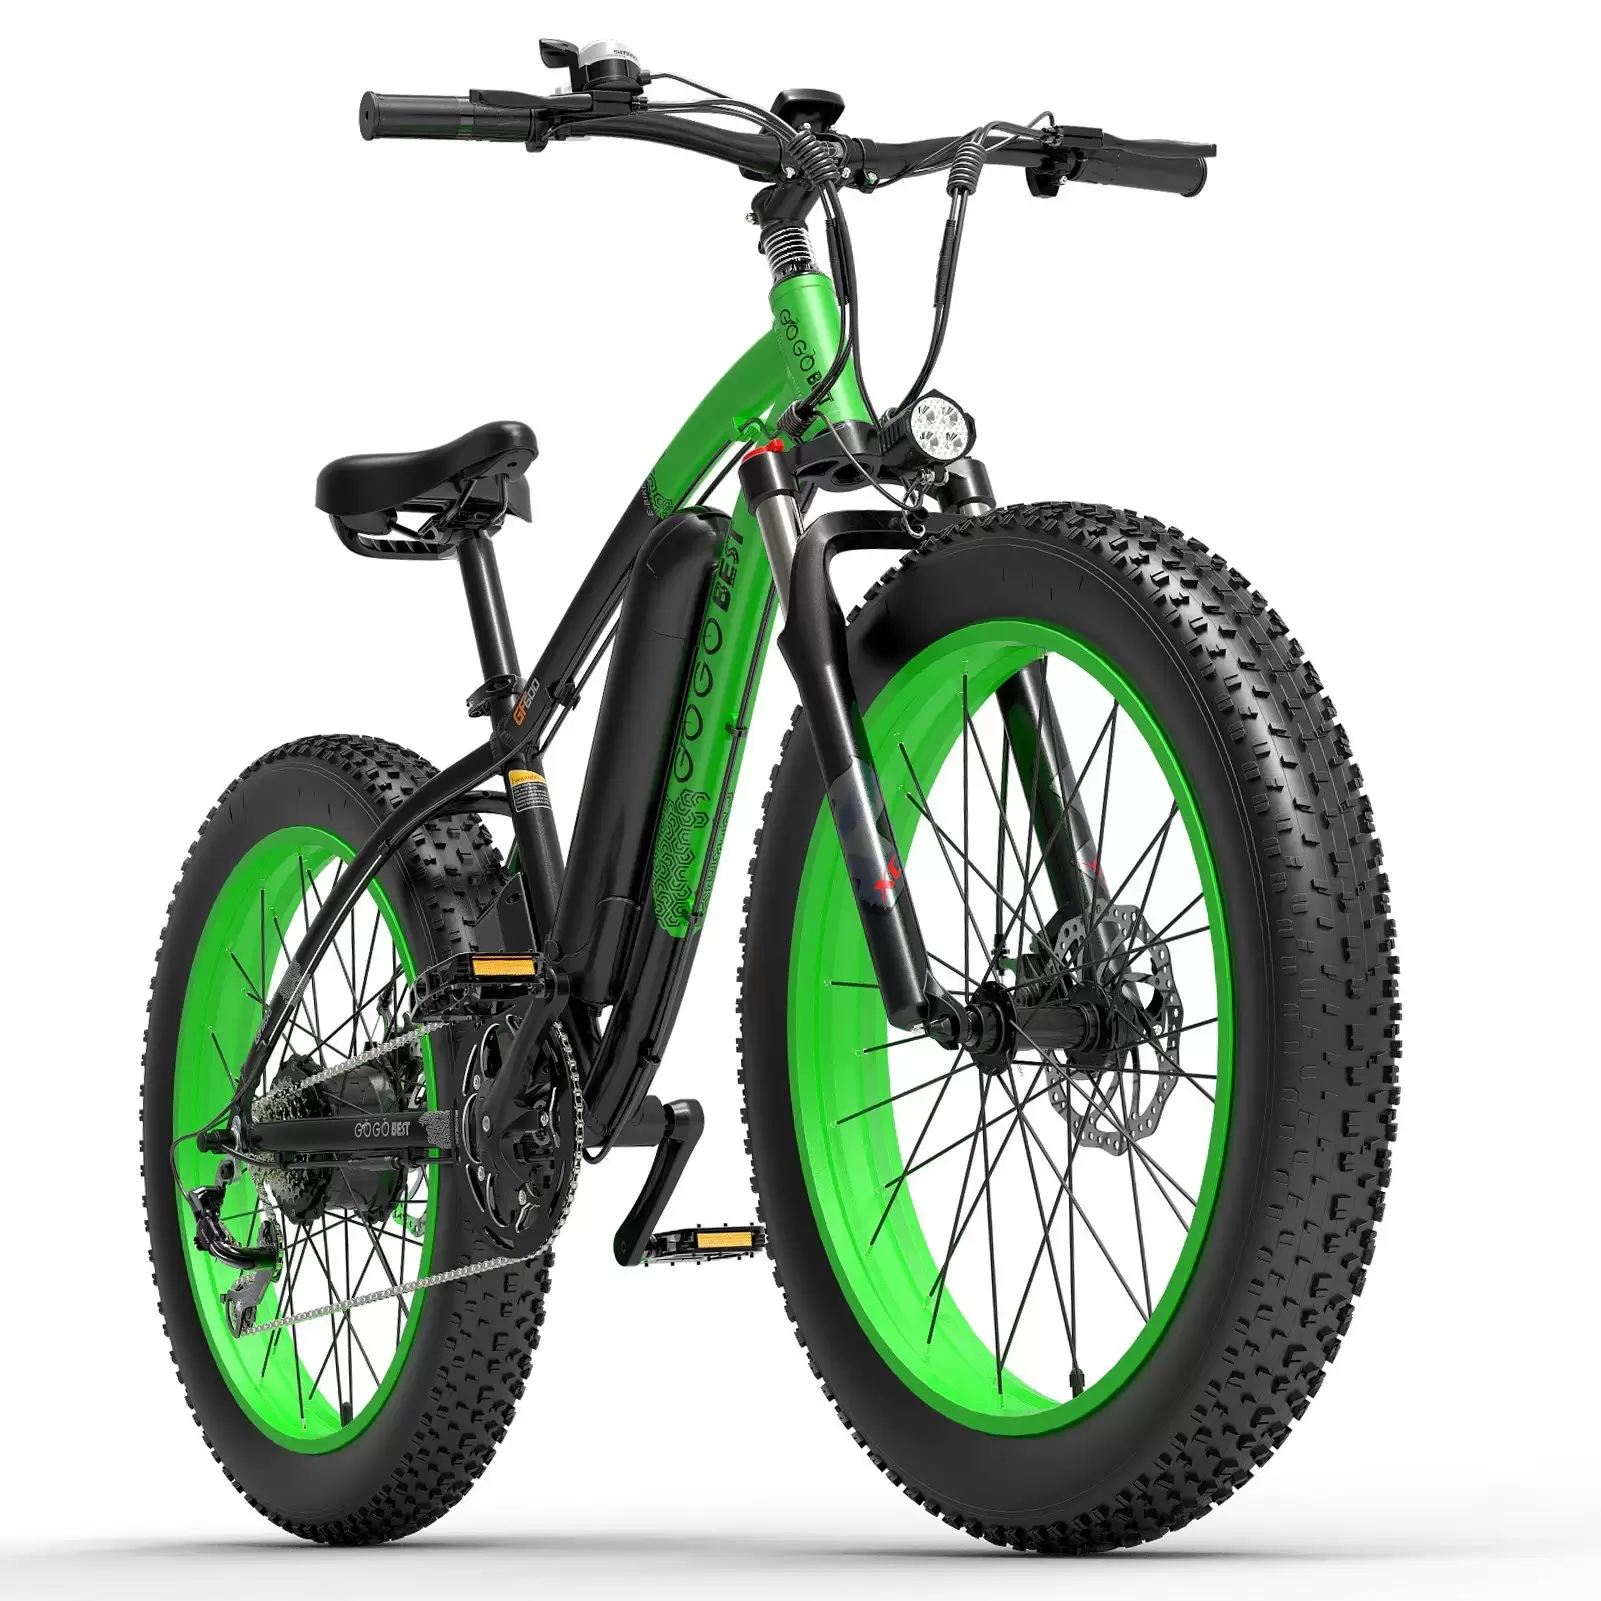 [Eu Warehouse] Get 58% Discount On Gogobest Gf600 Electric Bicycle 40v 1000w Power Top Speed 40km/H